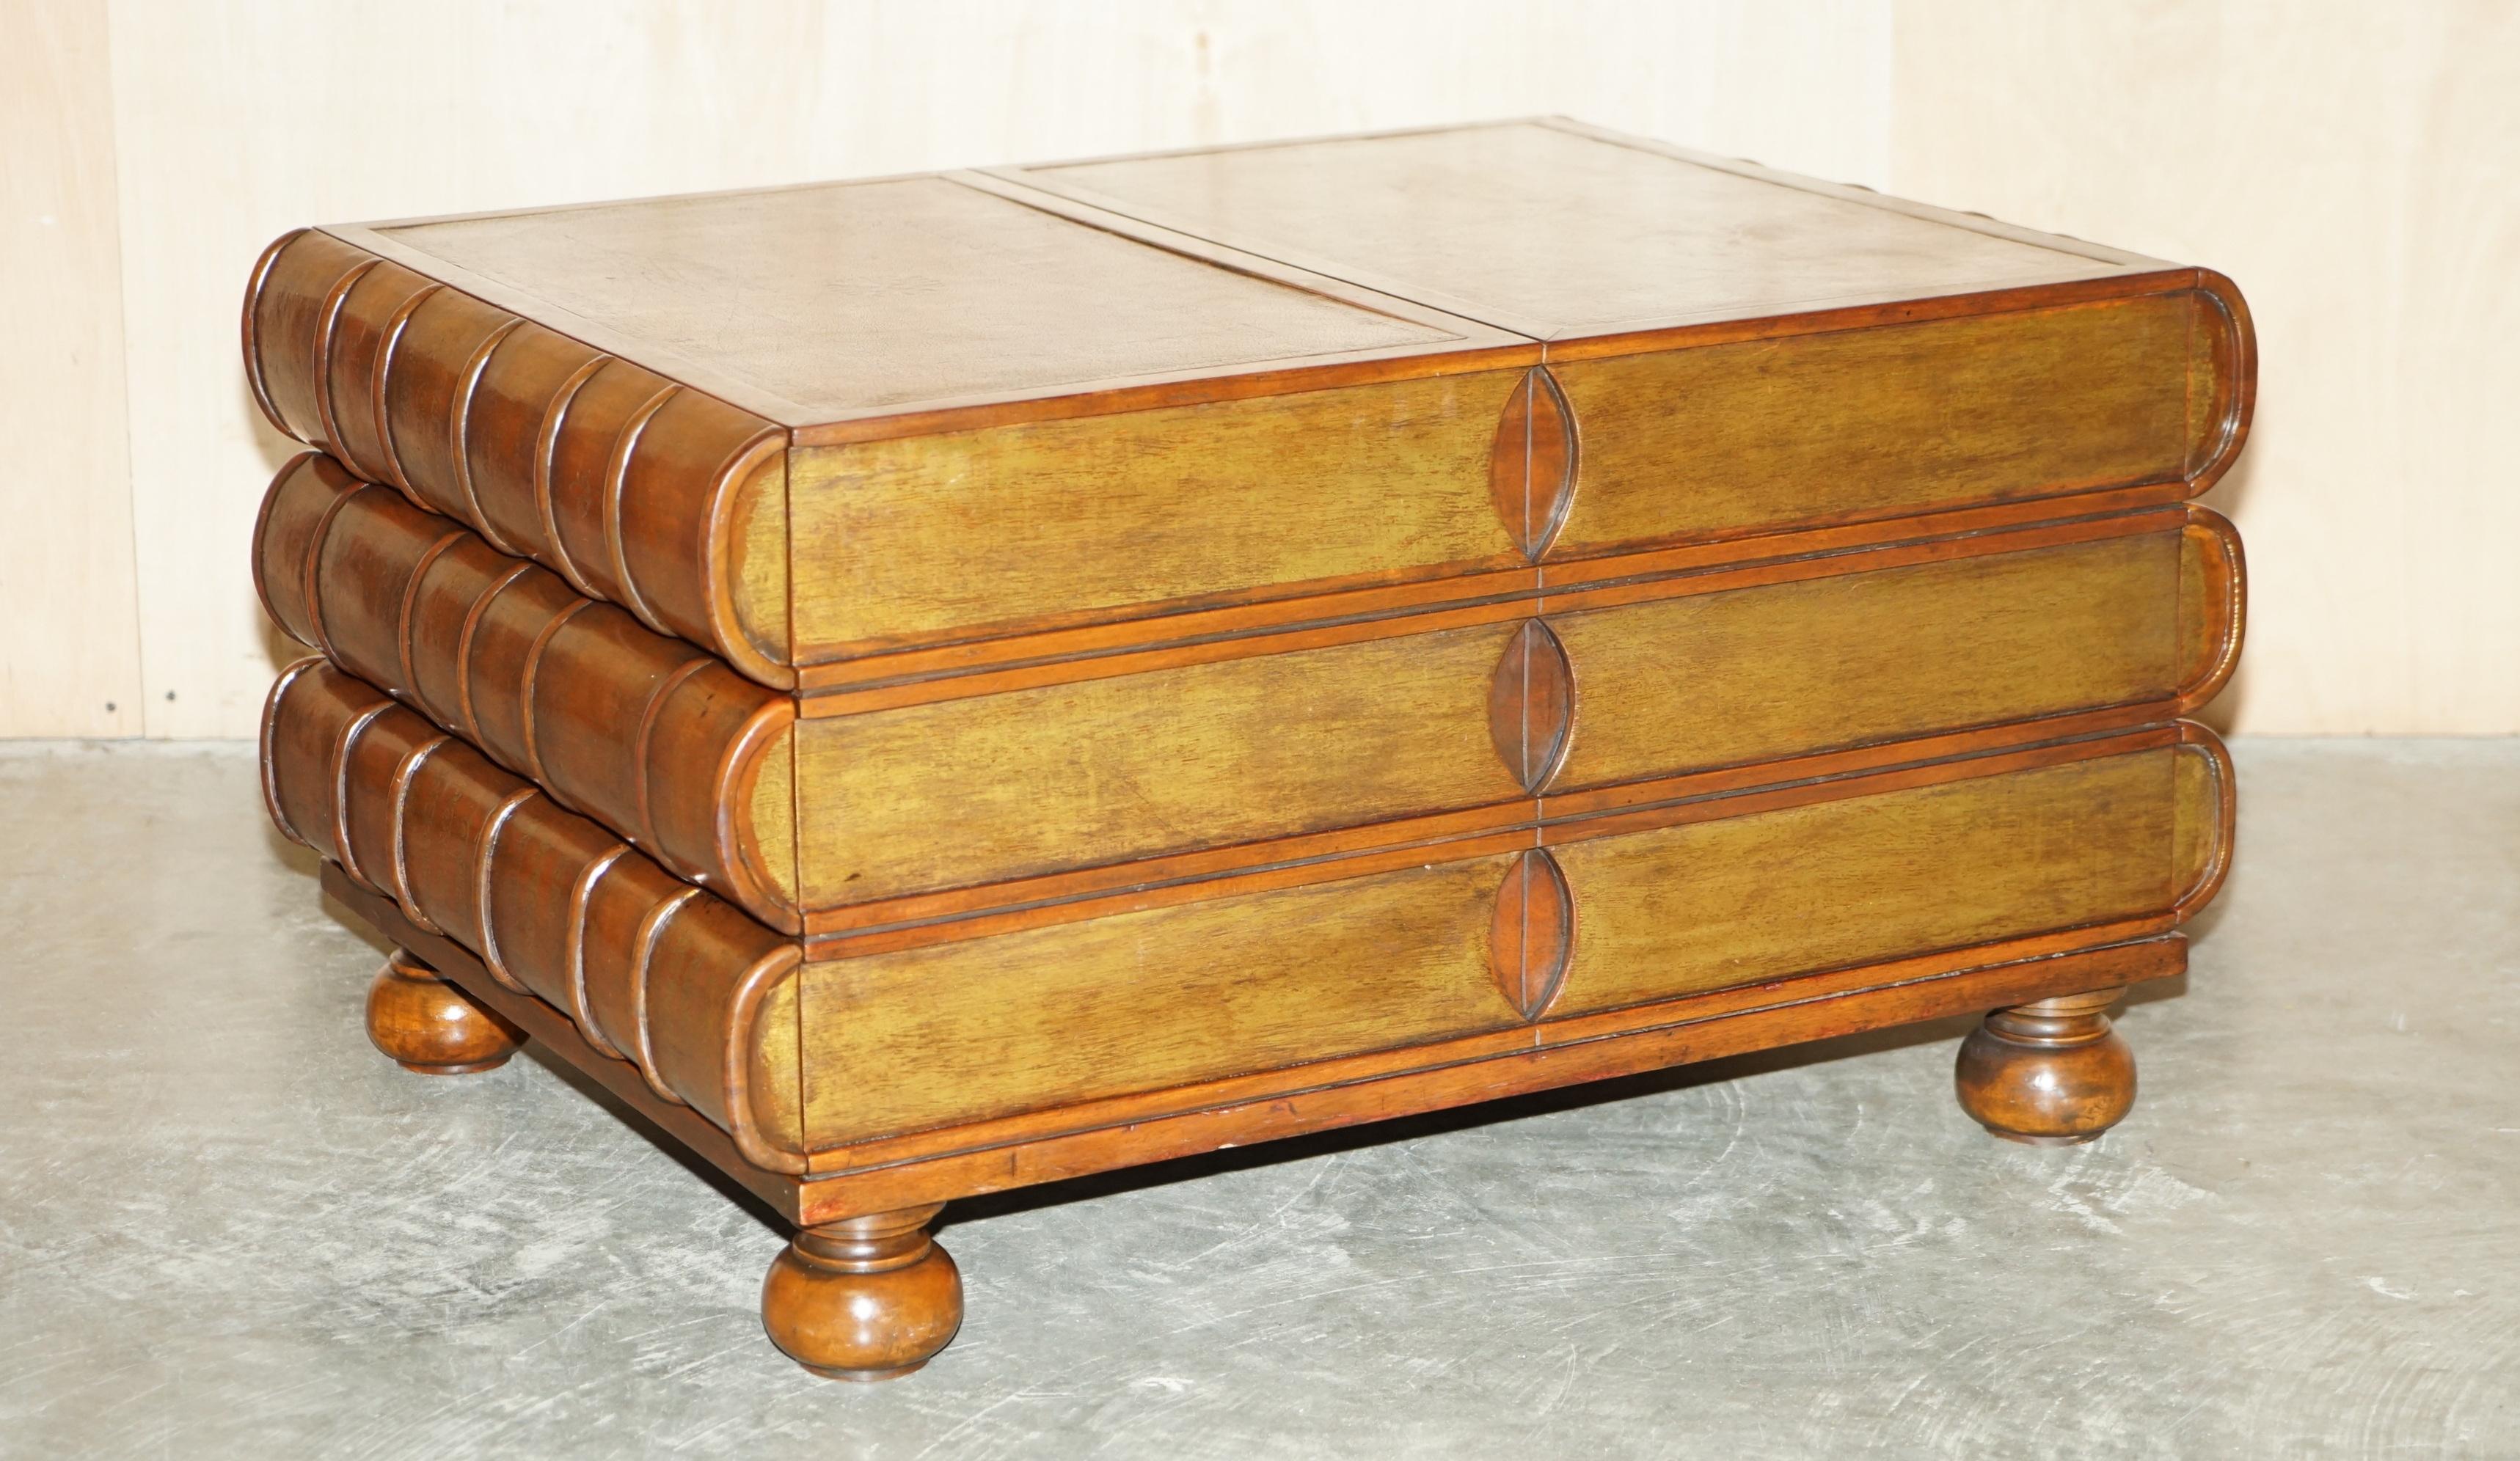 We are delighted to offer for sale this lovely Theodore Alexander stack of Scholars books coffee table with six large drawers

A well-made and decorative piece, the table has six drawers, the top is brown leather with ornate embossing, its